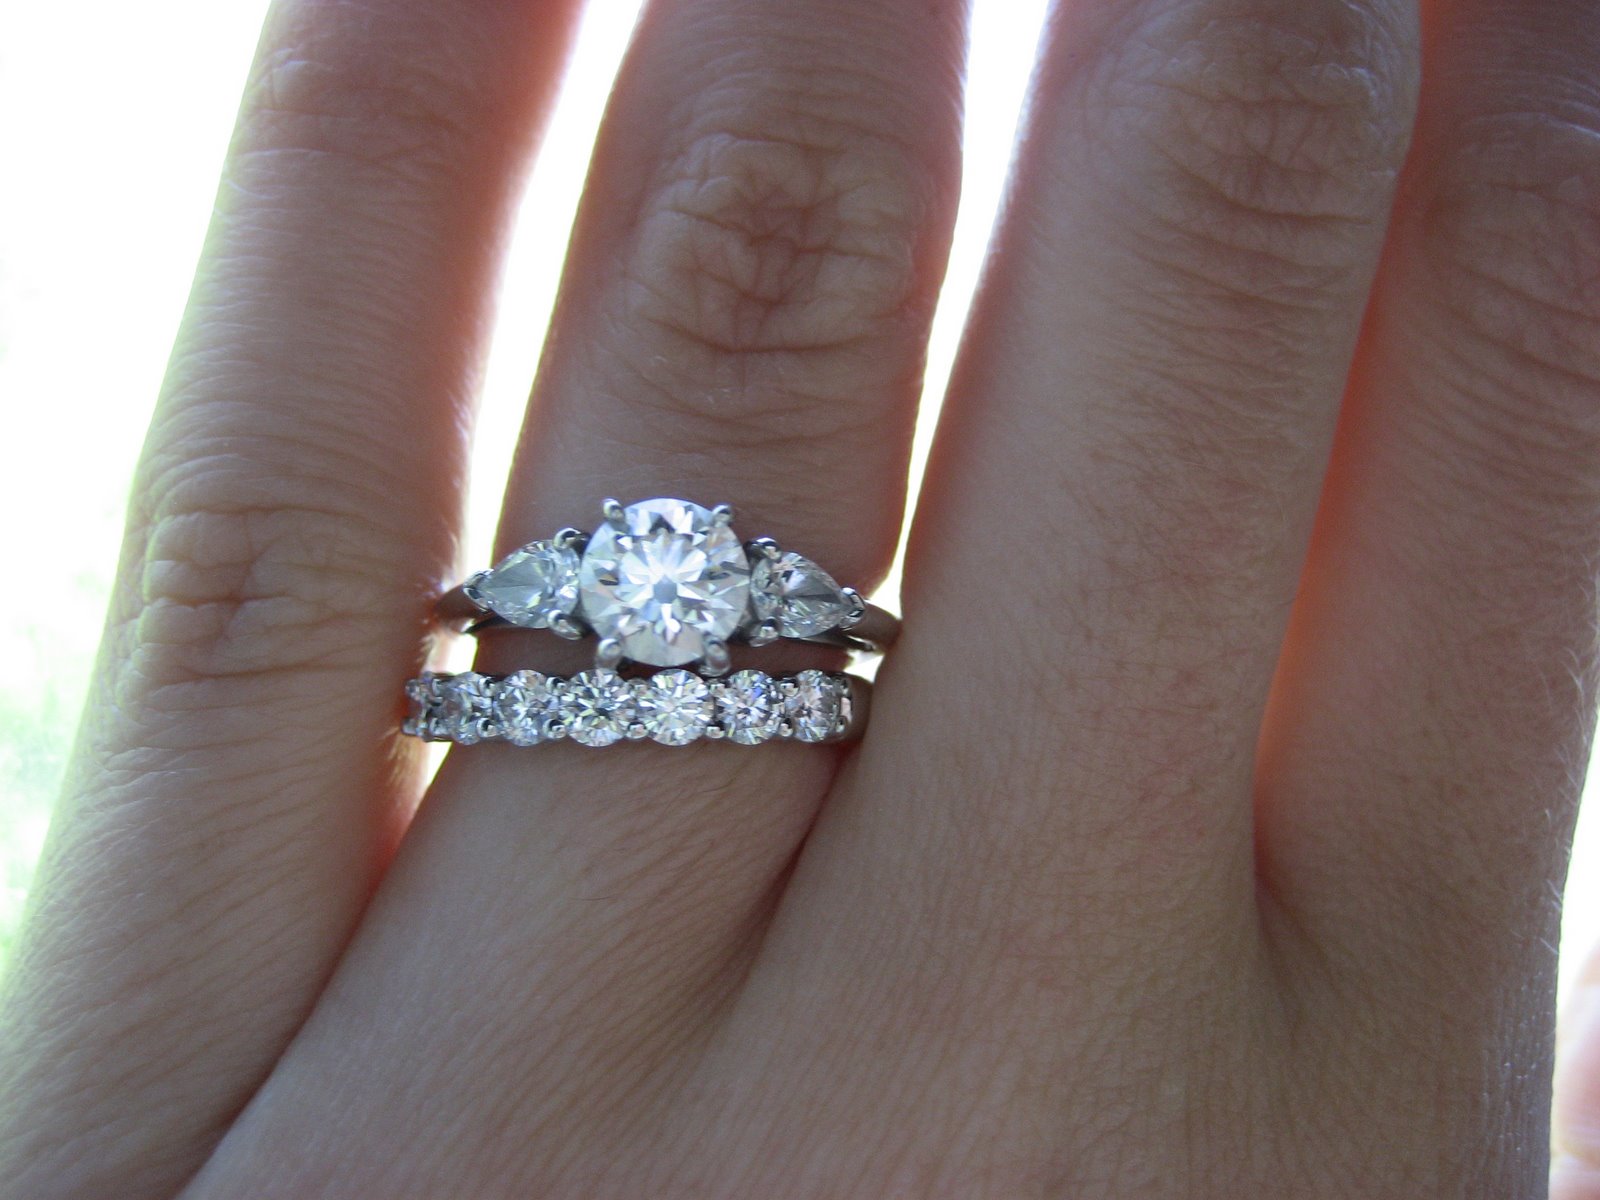 Diamond engagement rings and wedding sets